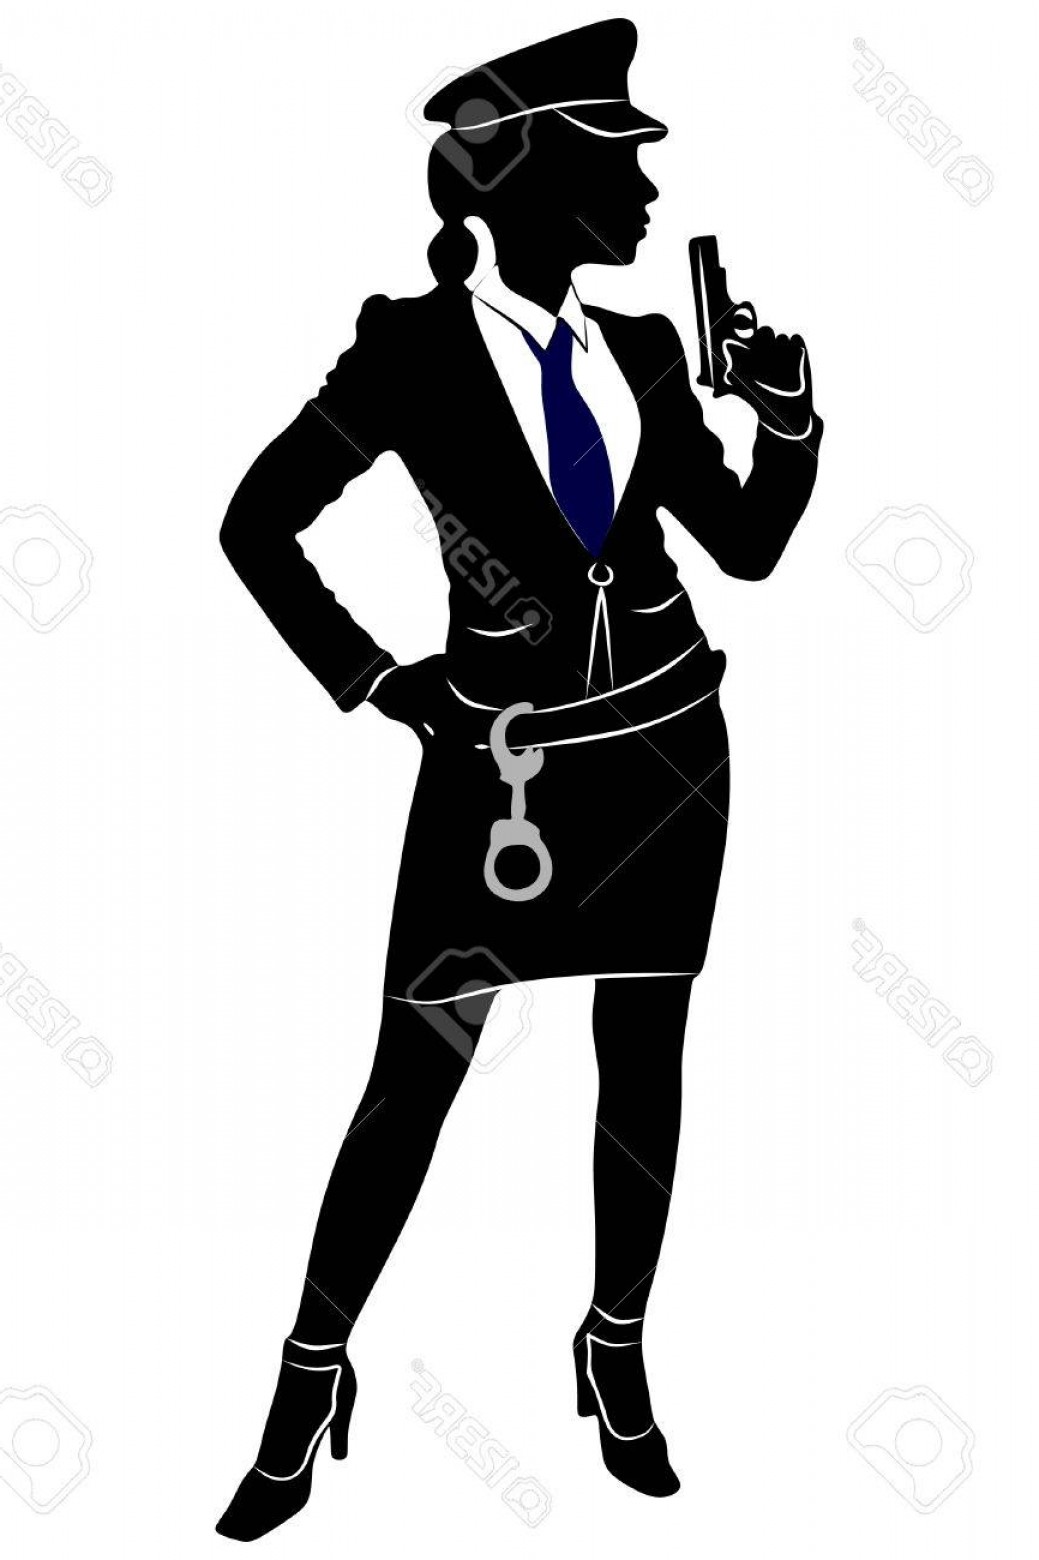 Download Police Silhouette Vector at Vectorified.com | Collection ...